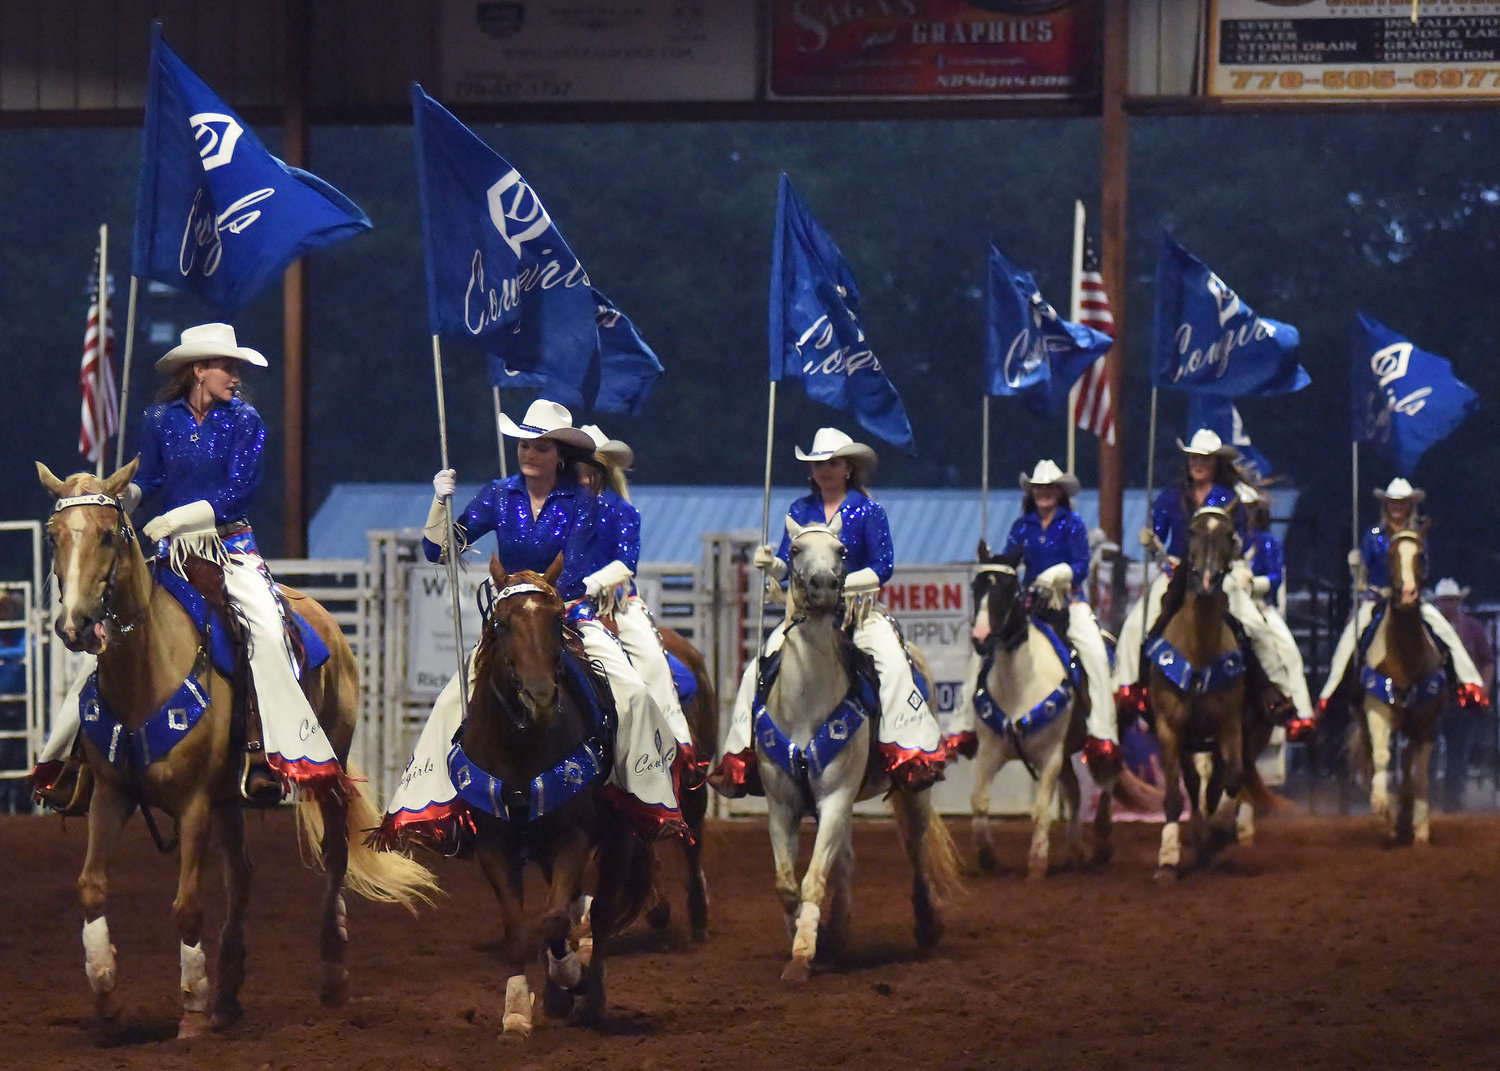 Bartow County Championship Rodeo on tap for July 1213 The Daily